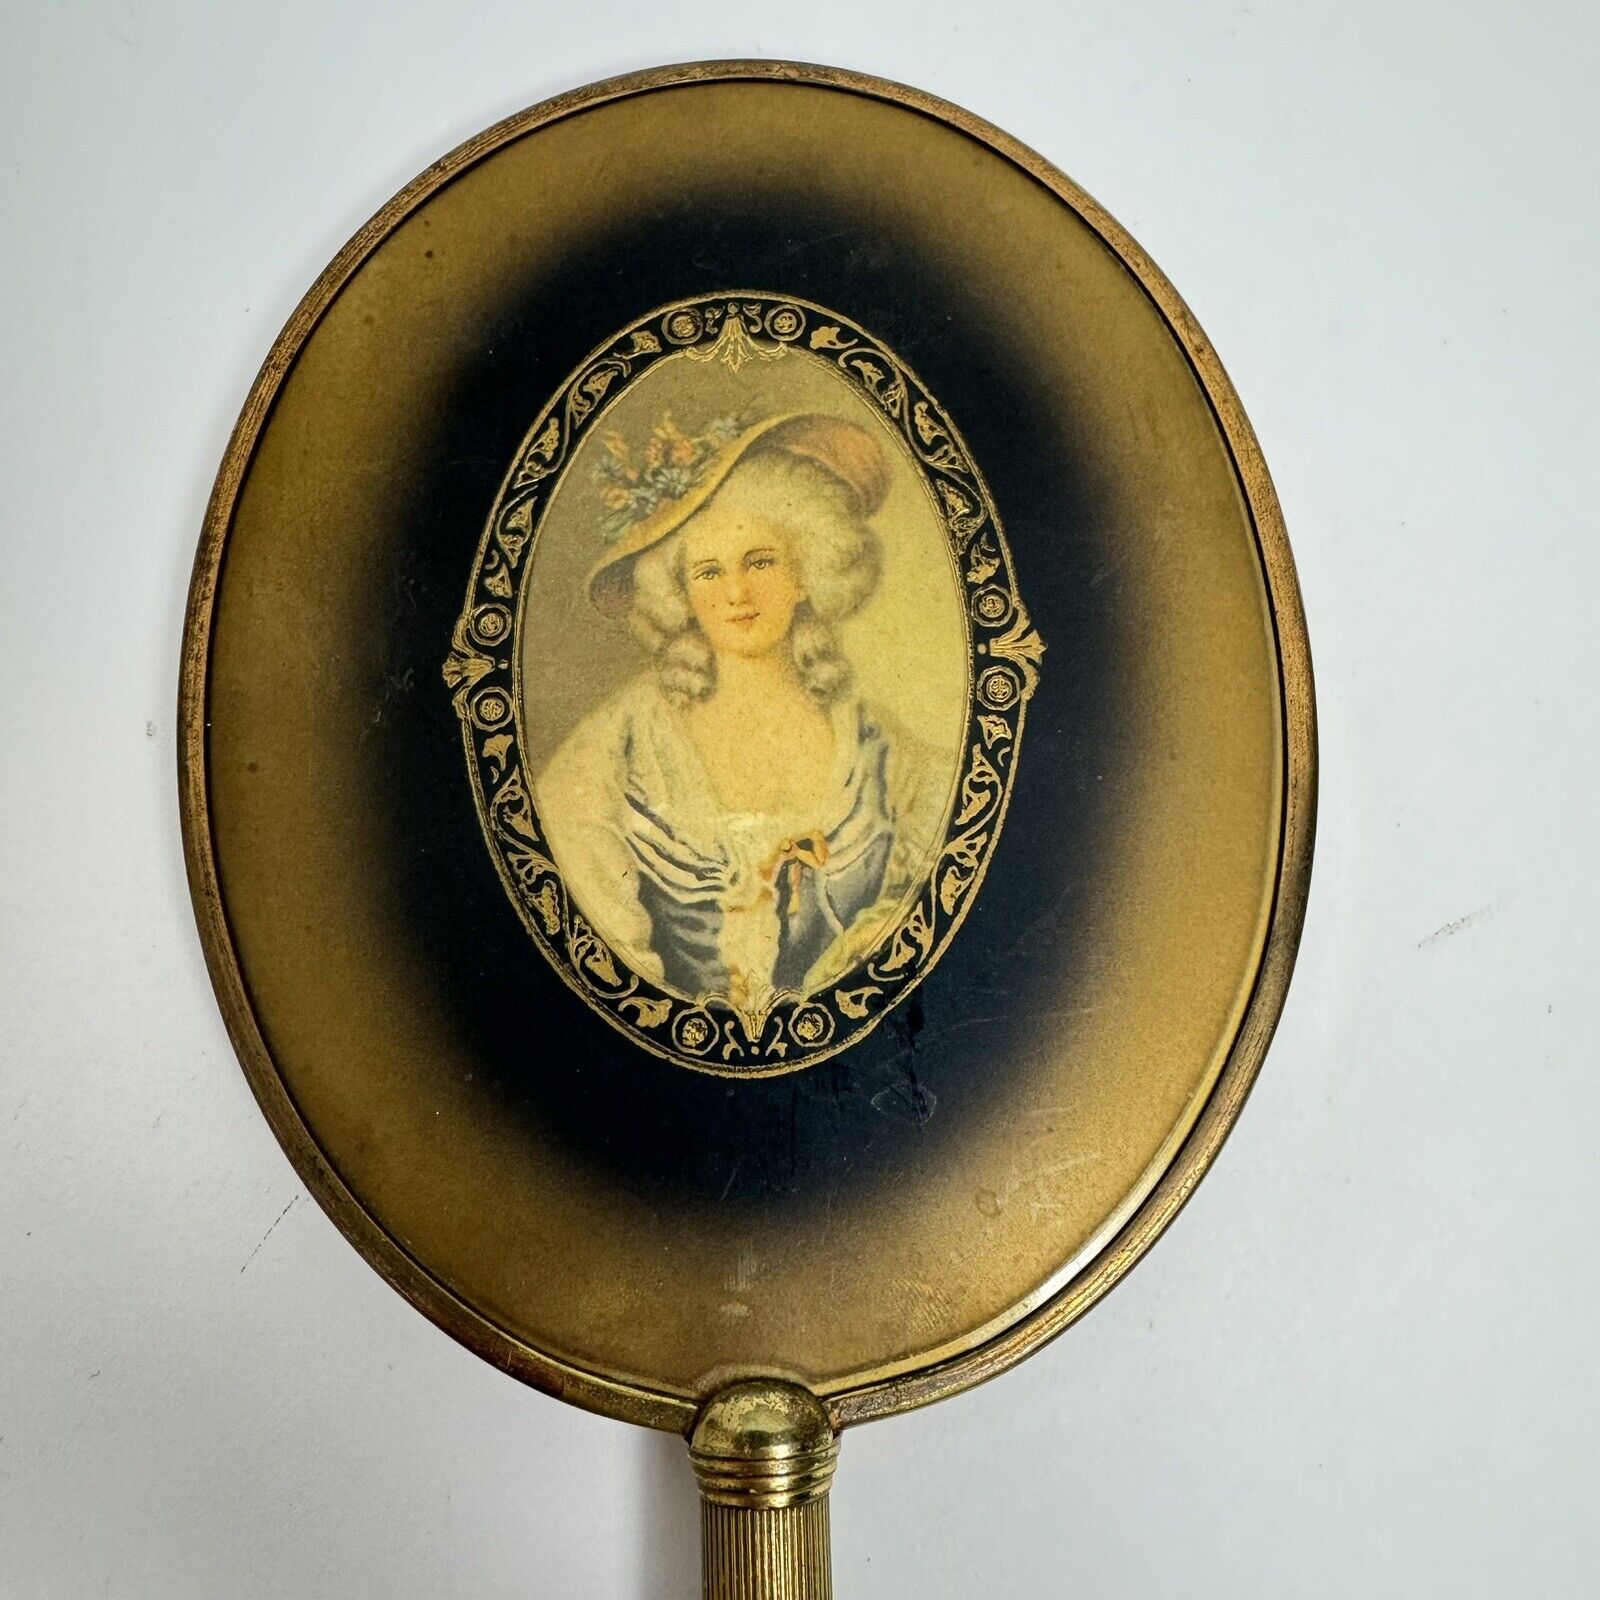 VTG Hand Mirrior With Victorian Lady Portrait, 6” Oval, Beveled Glass, Metal